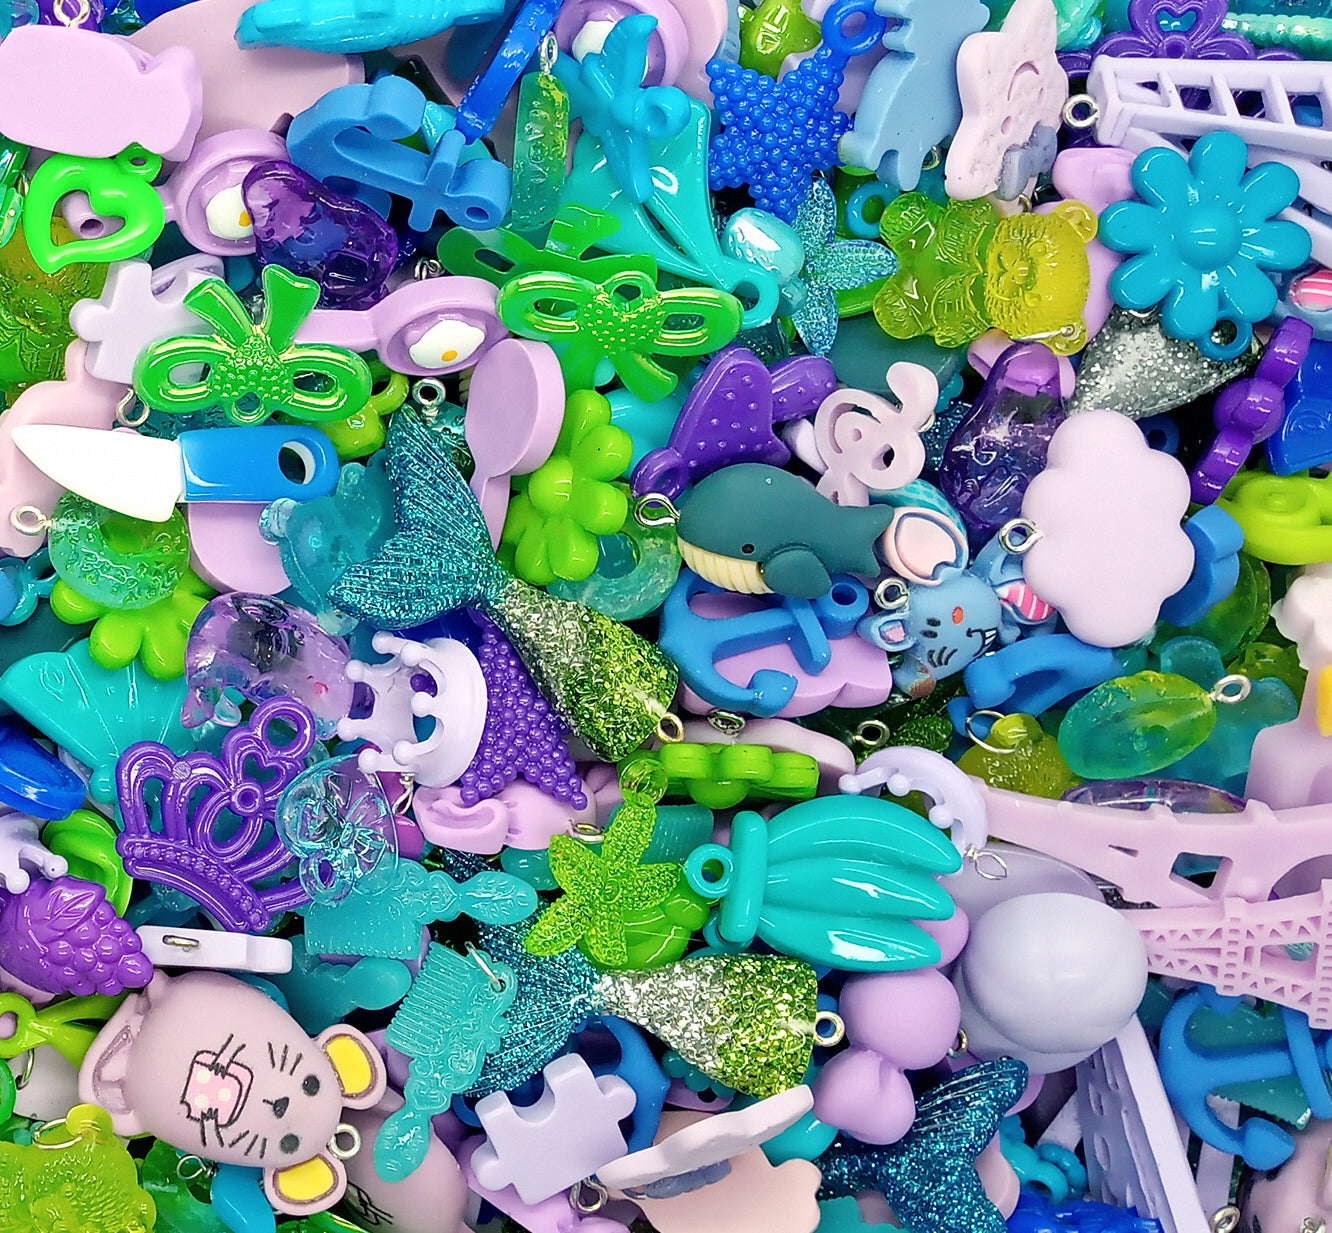 Cute Charm Mix in Blue Green & Purple, 30 pieces, Flatback Resin and Acrylic Mix